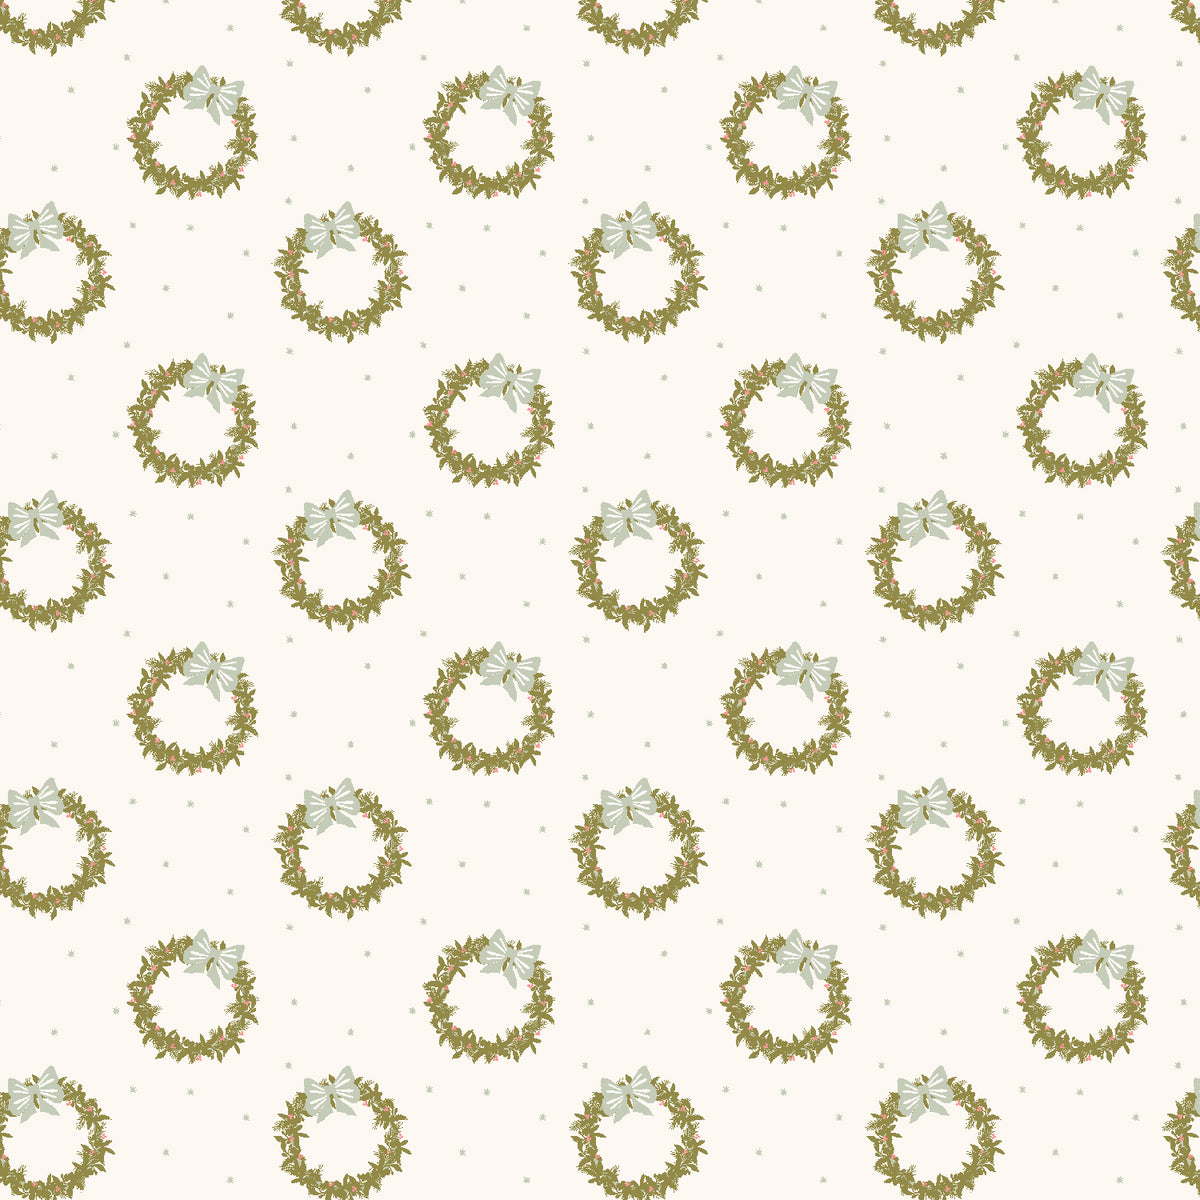 Tinsel on the Trail Quilt Fabric by Cotton+Steel - Wreath in Sage (Cream/Medium Green) - AC601-SA3